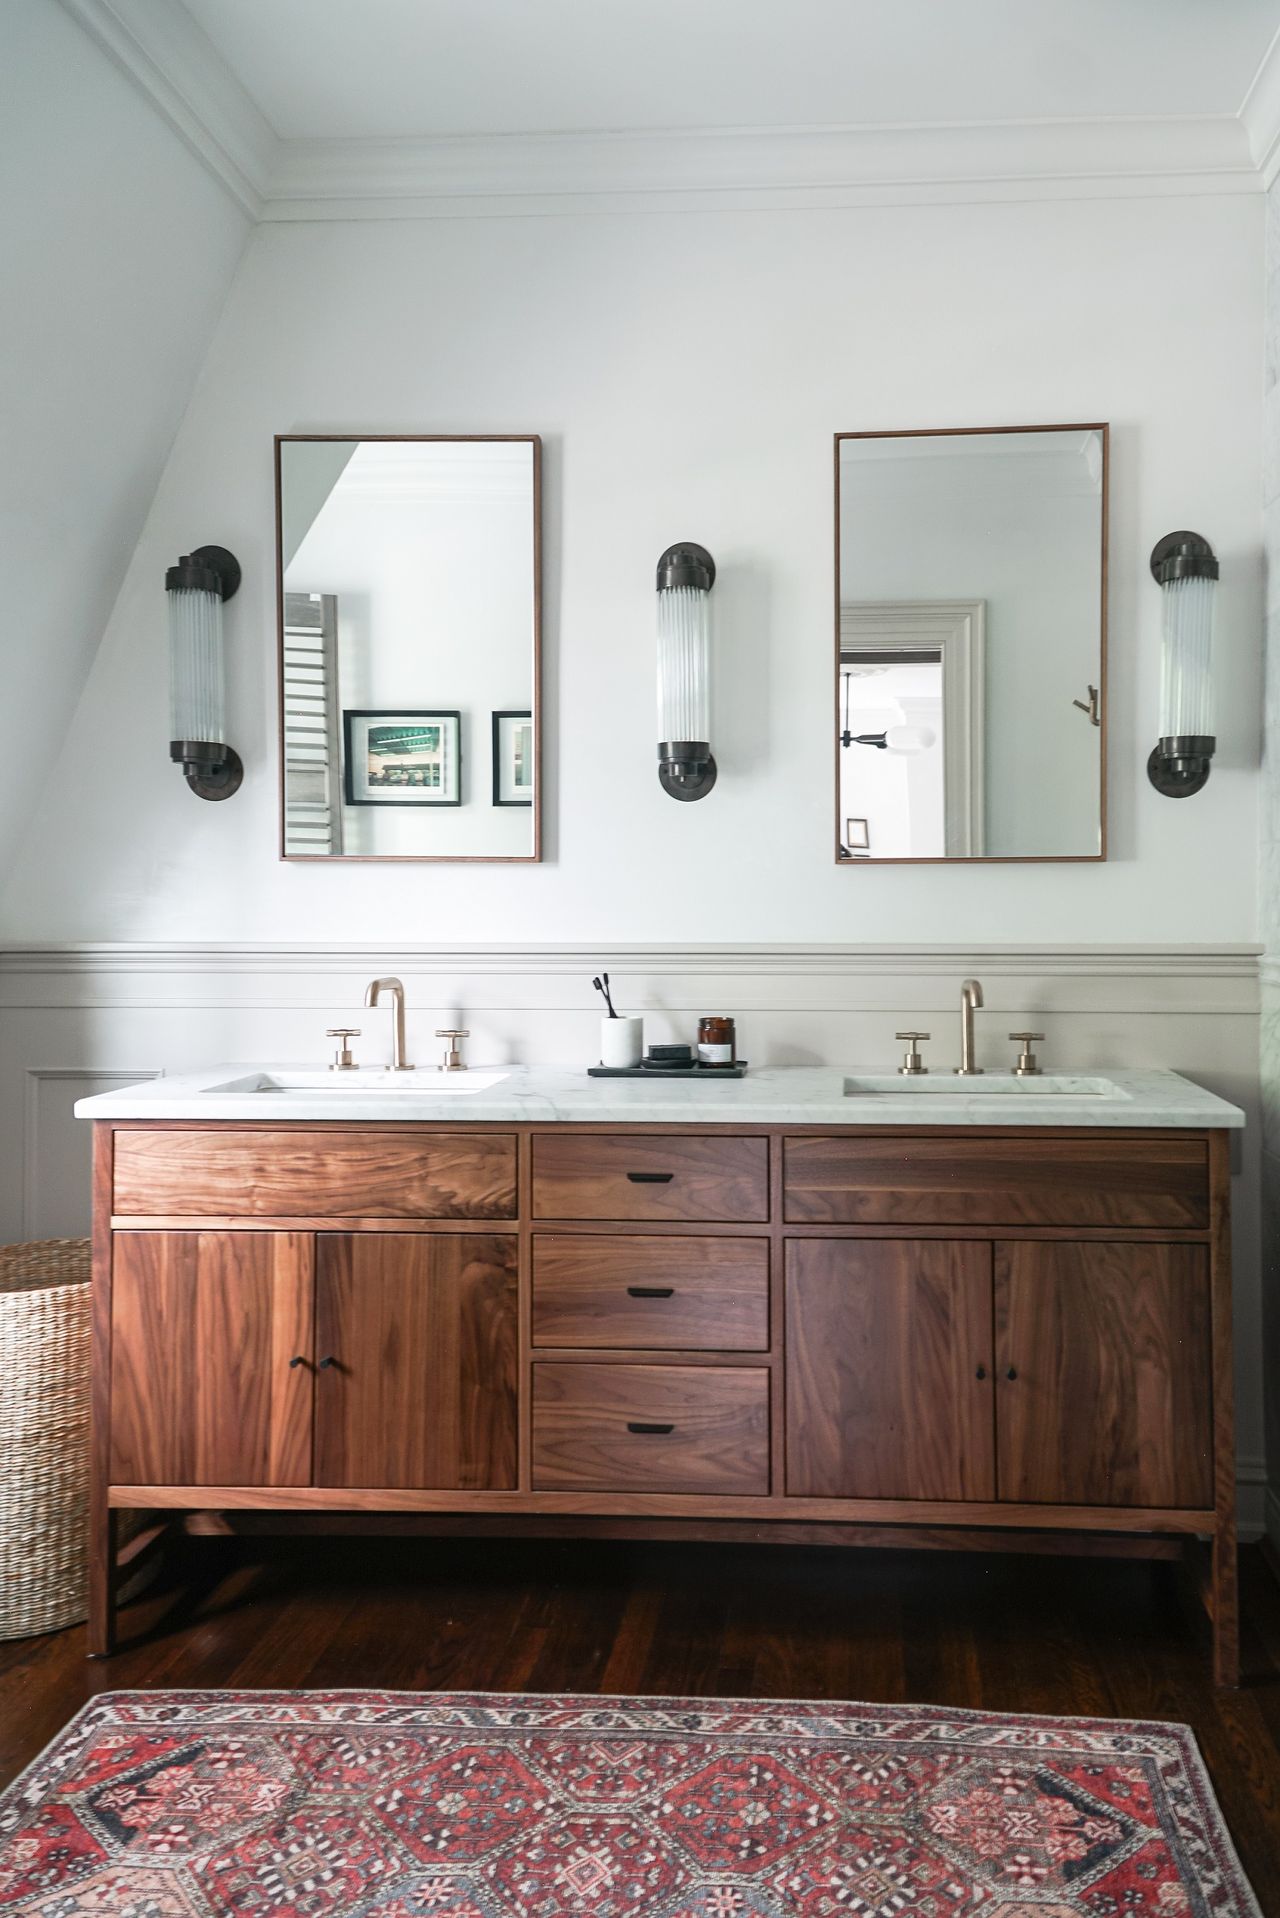 14 powder room ideas – gorgeous looks that prove you can go bold in a